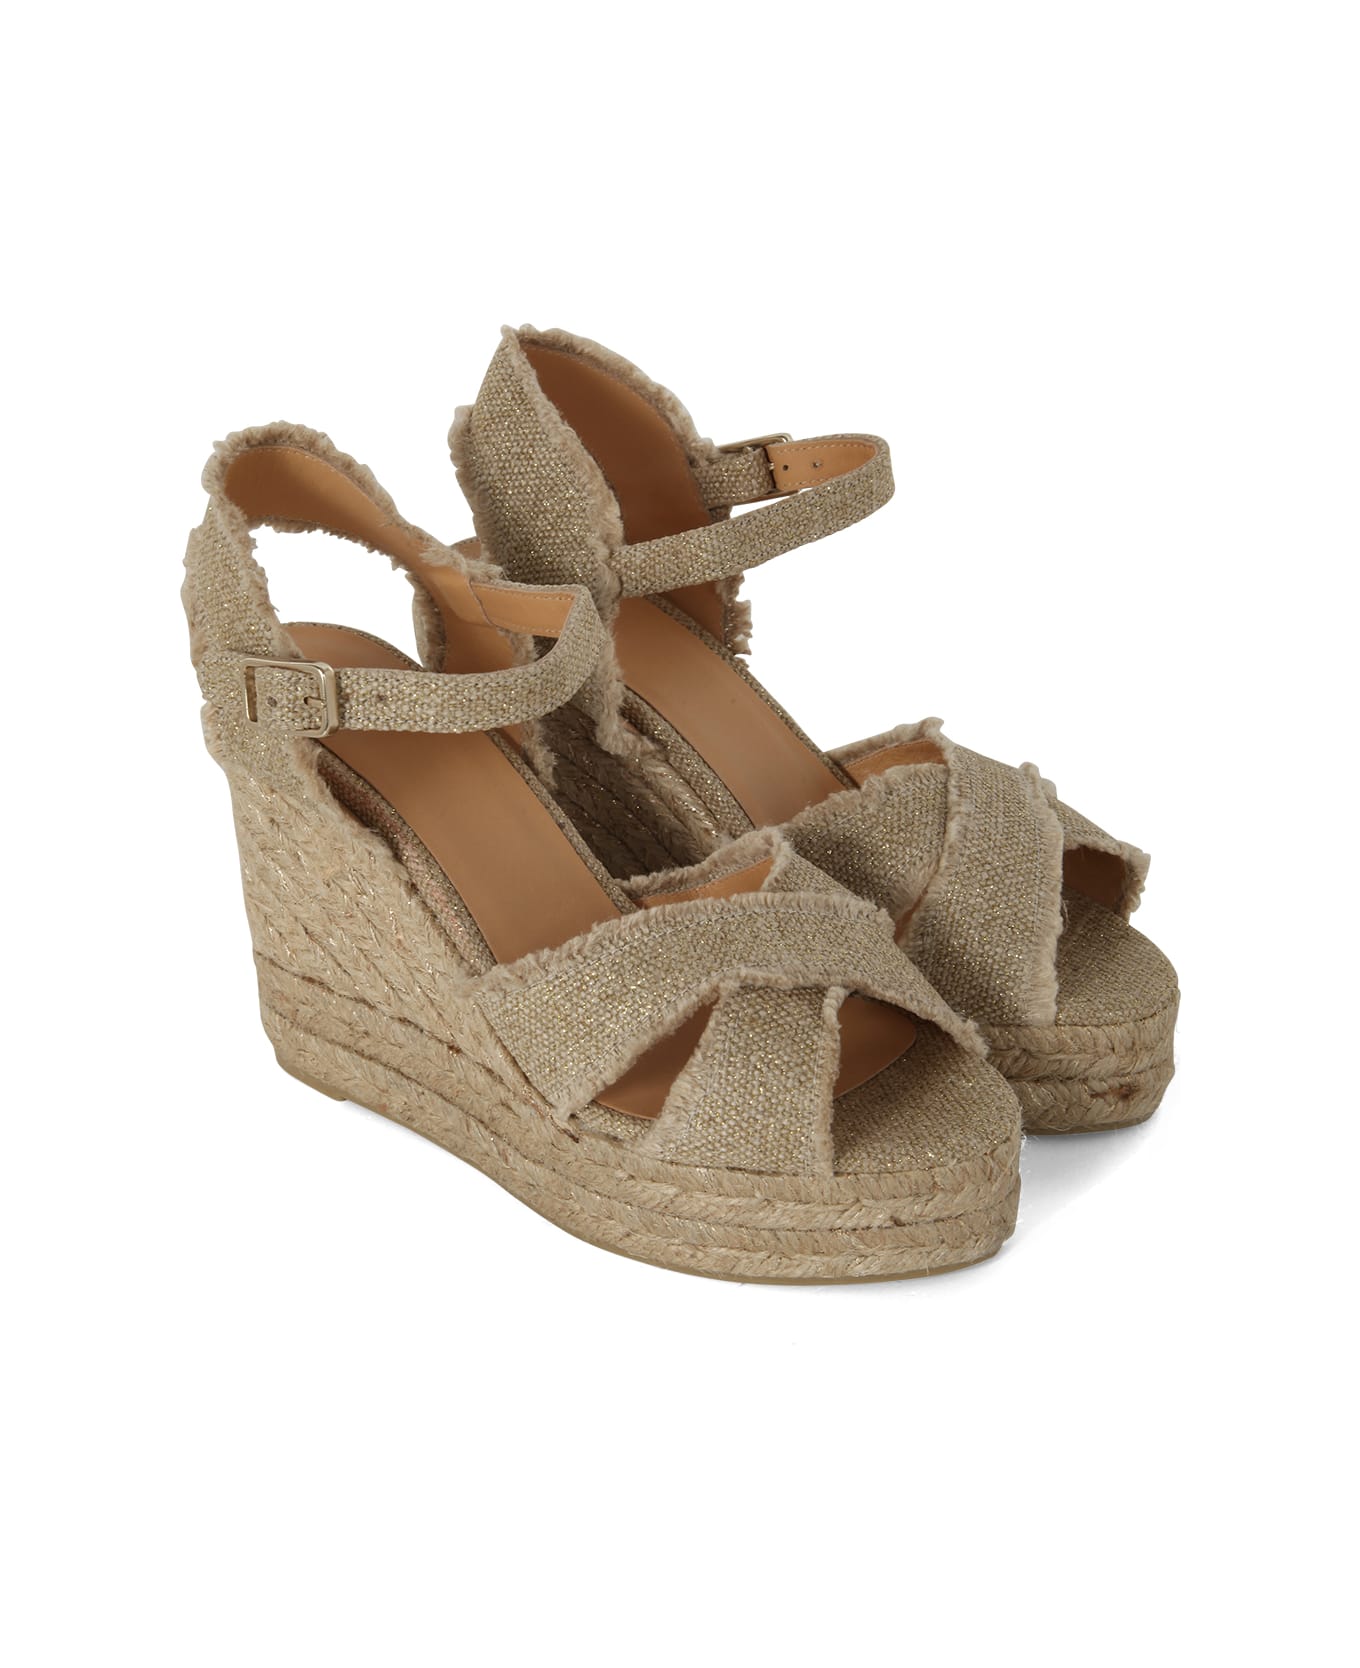 Castañer Bromelia Espadrilles With Belt On Ankles And Fringed Ankles - Light Gold サンダル